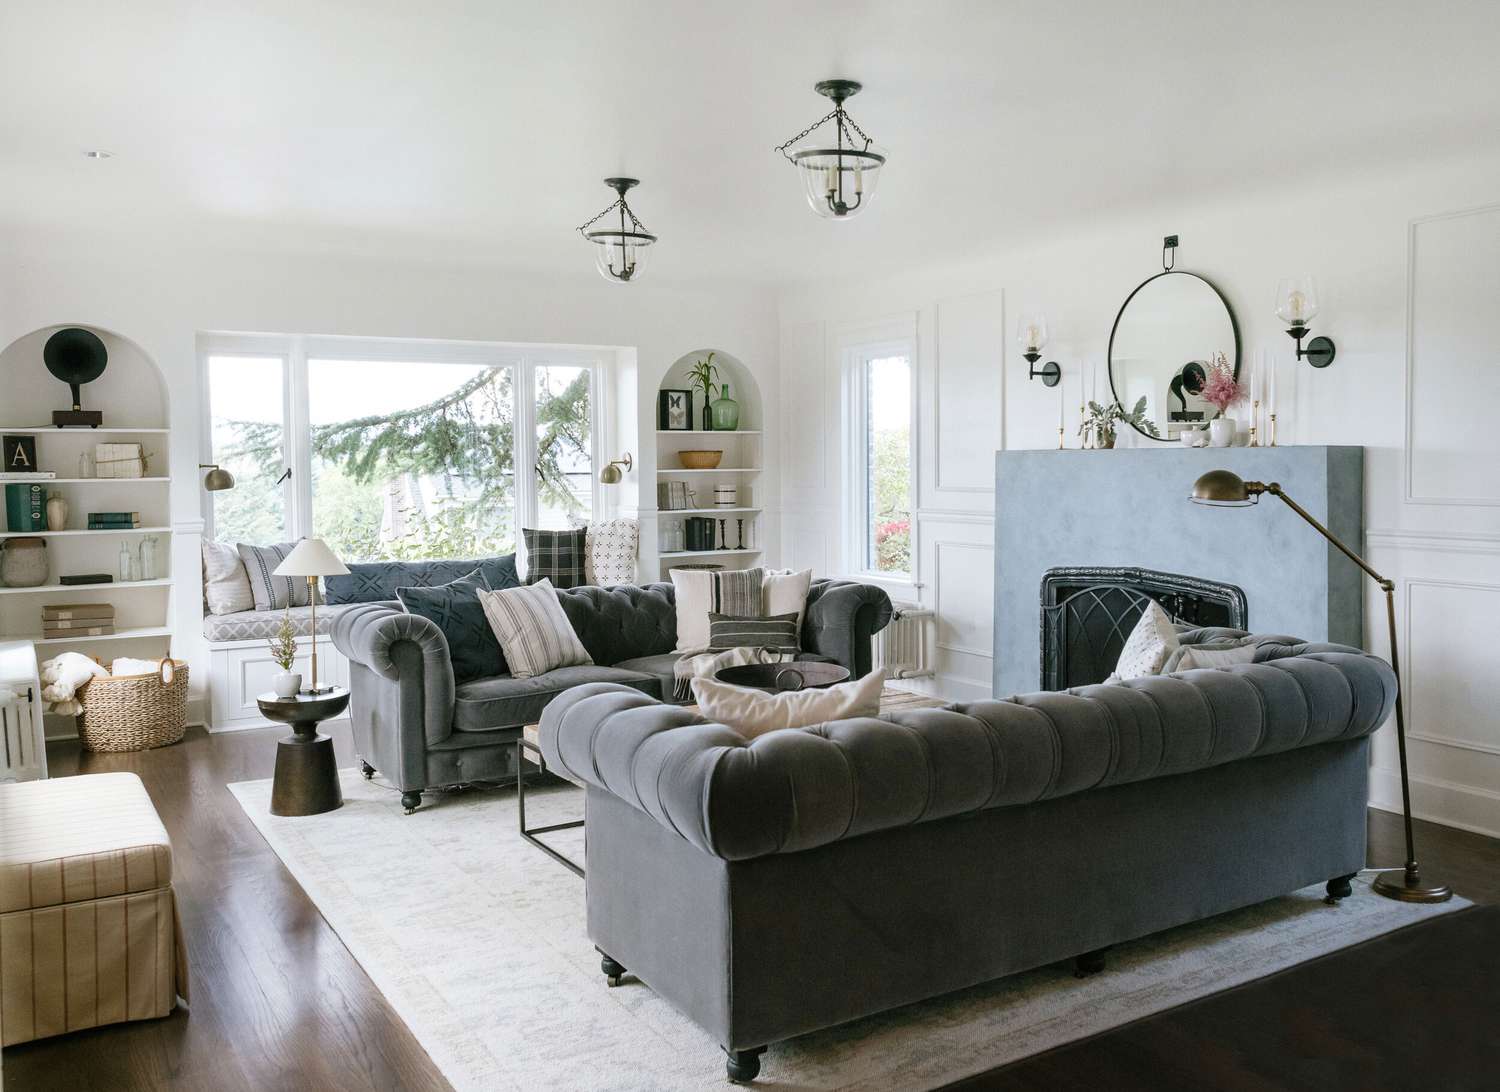 How Can You Make A Cool Gray Room Feel Warm And Inviting?